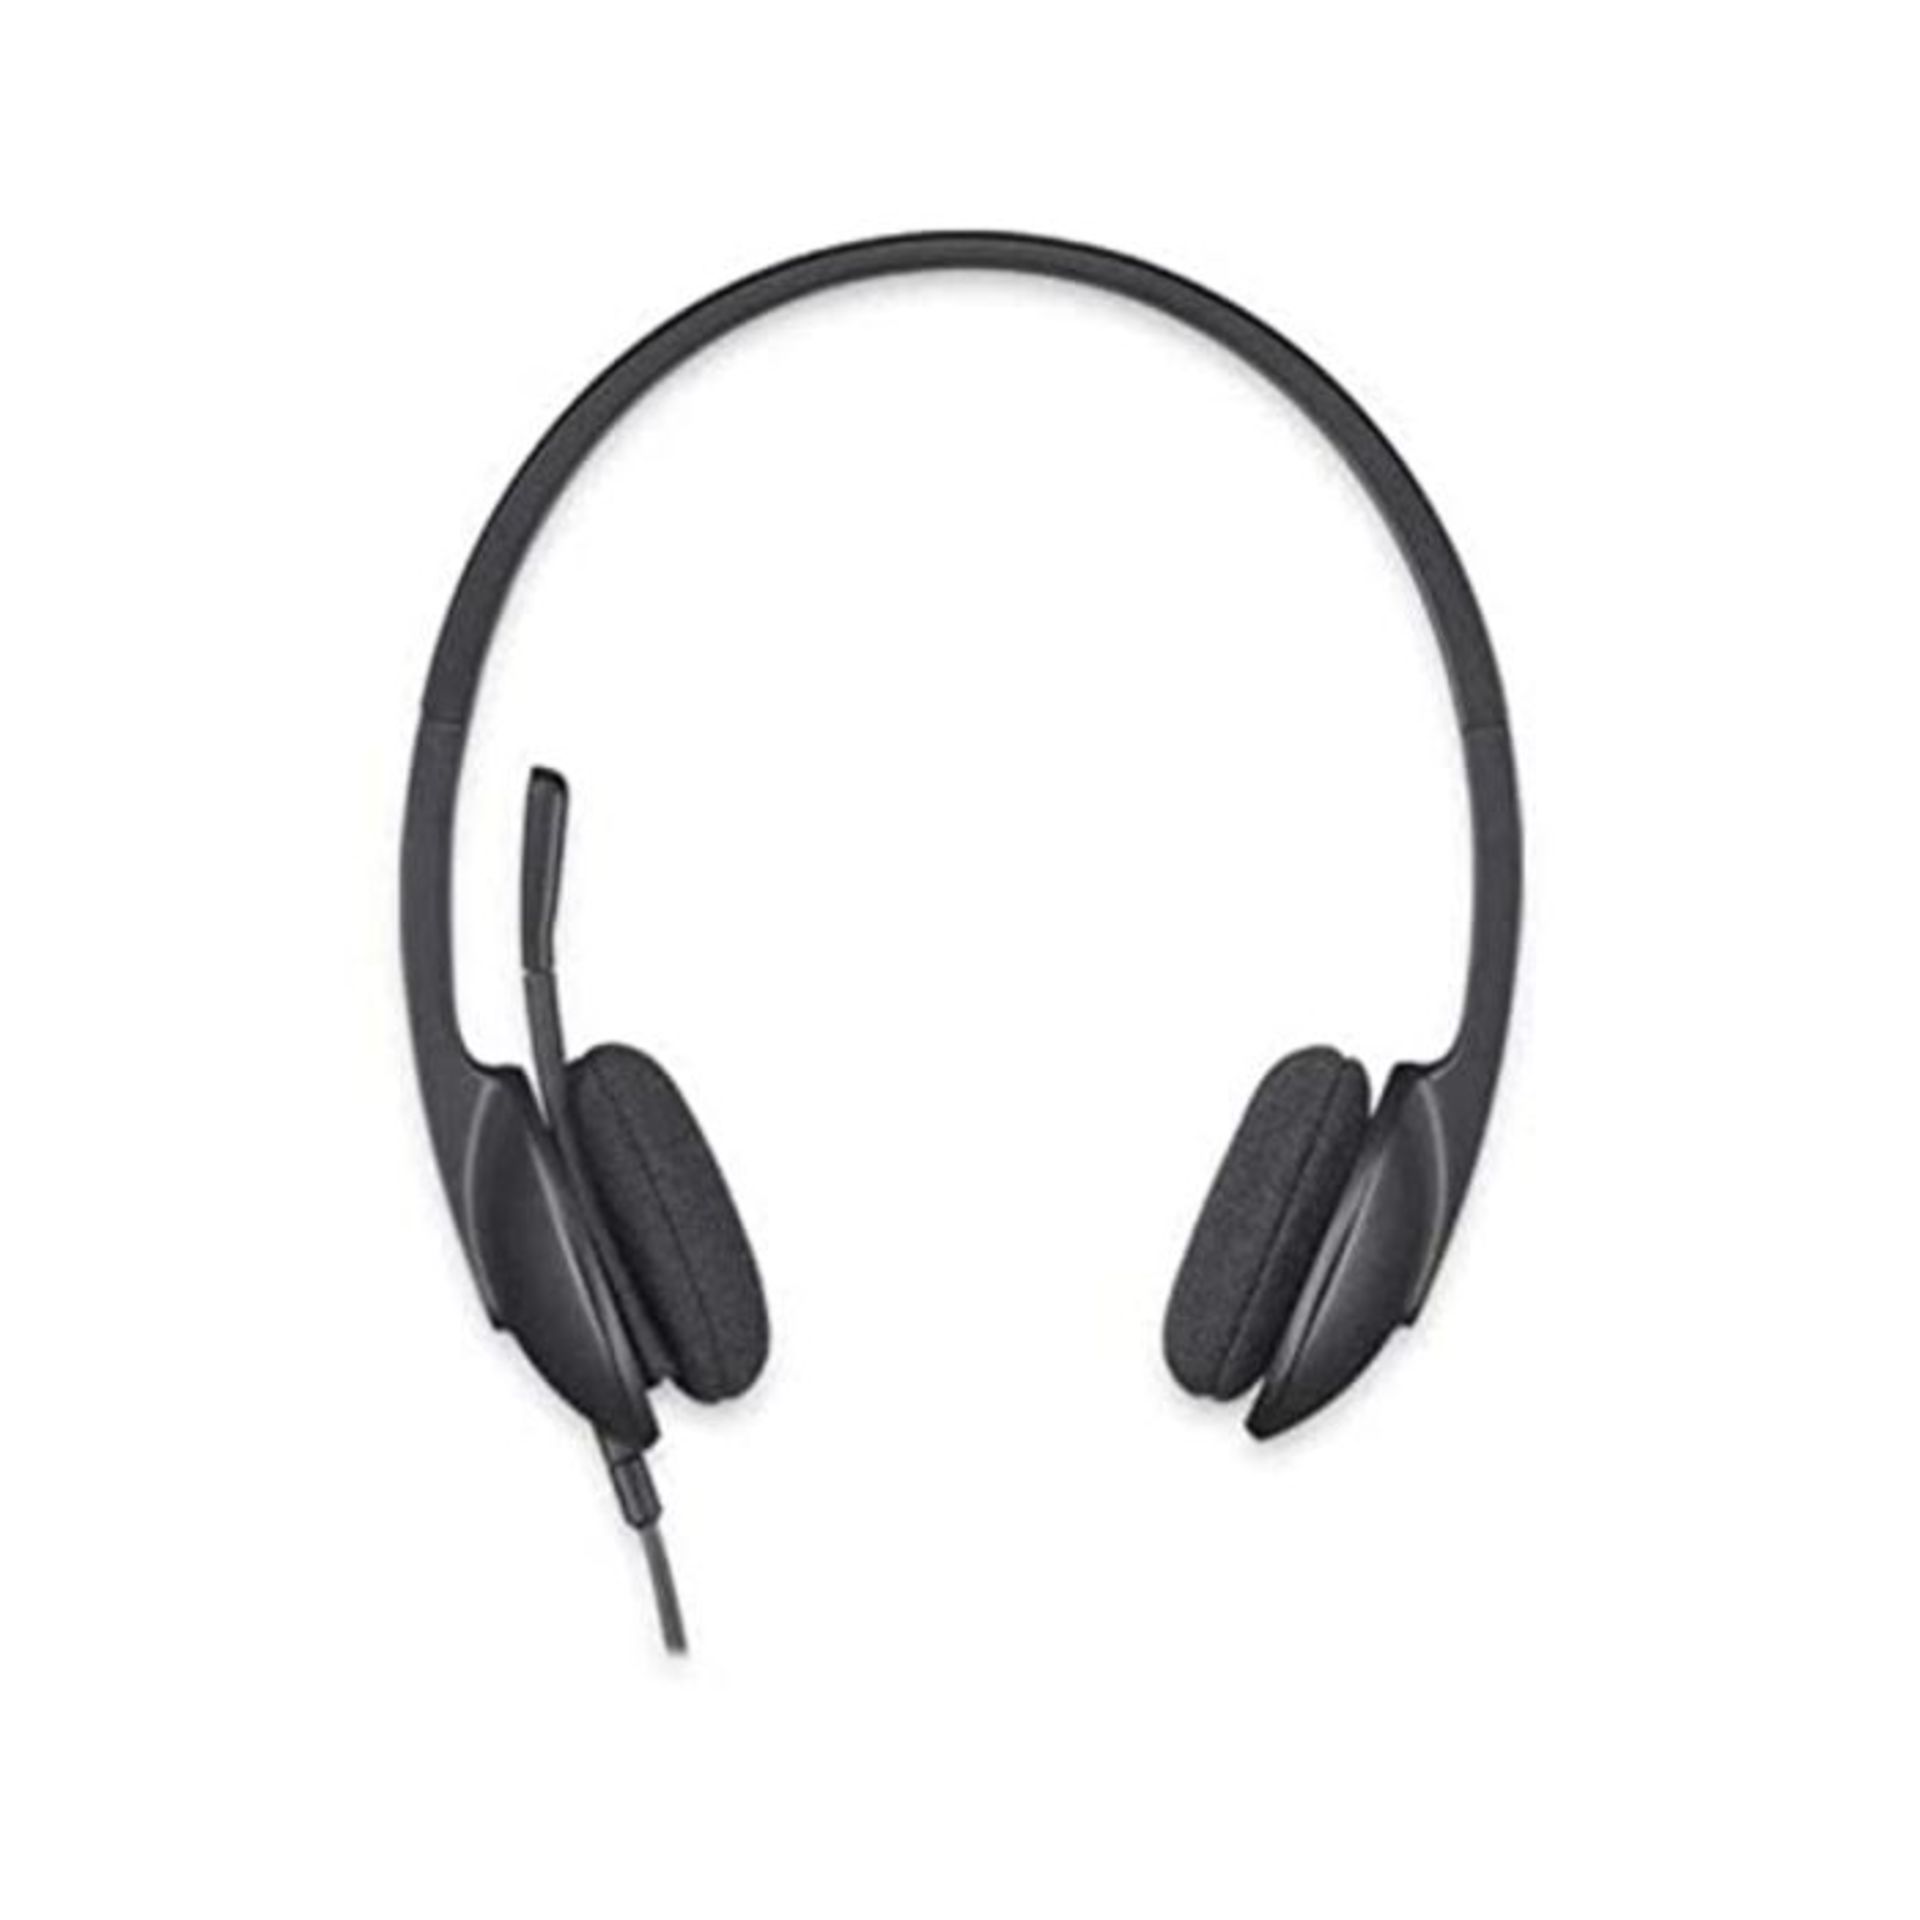 Logitech H340 Wired Headset, Stereo Headphones with Noise-Cancelling Microphone, USB,